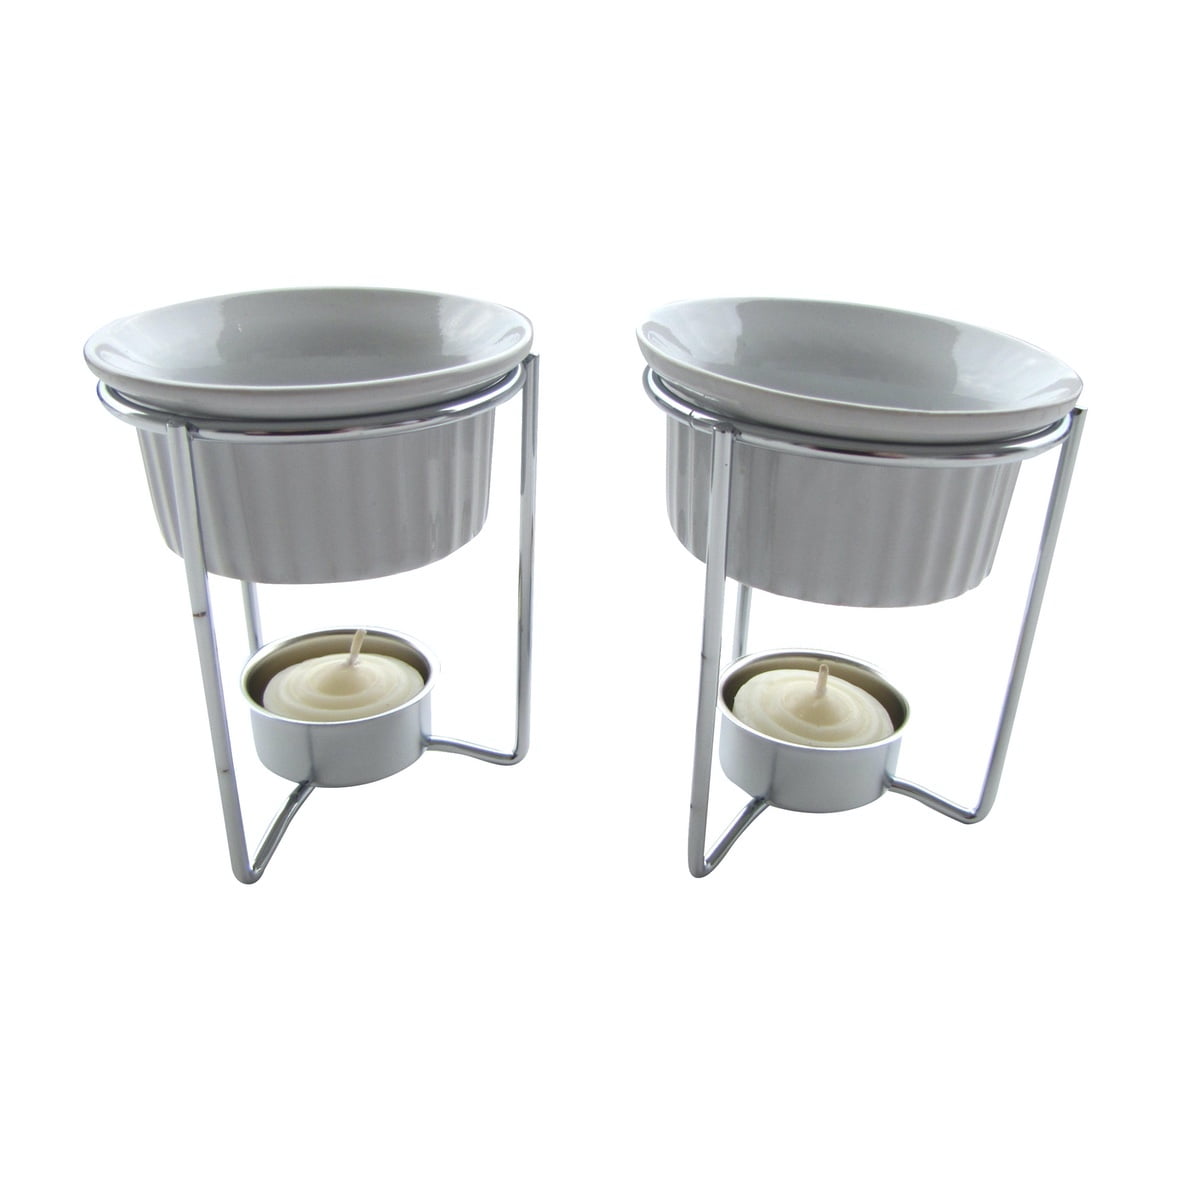 HIC Brands That Cook White Ceramic Butter Warmers With Tealight Stand Set of 2 for sale online 